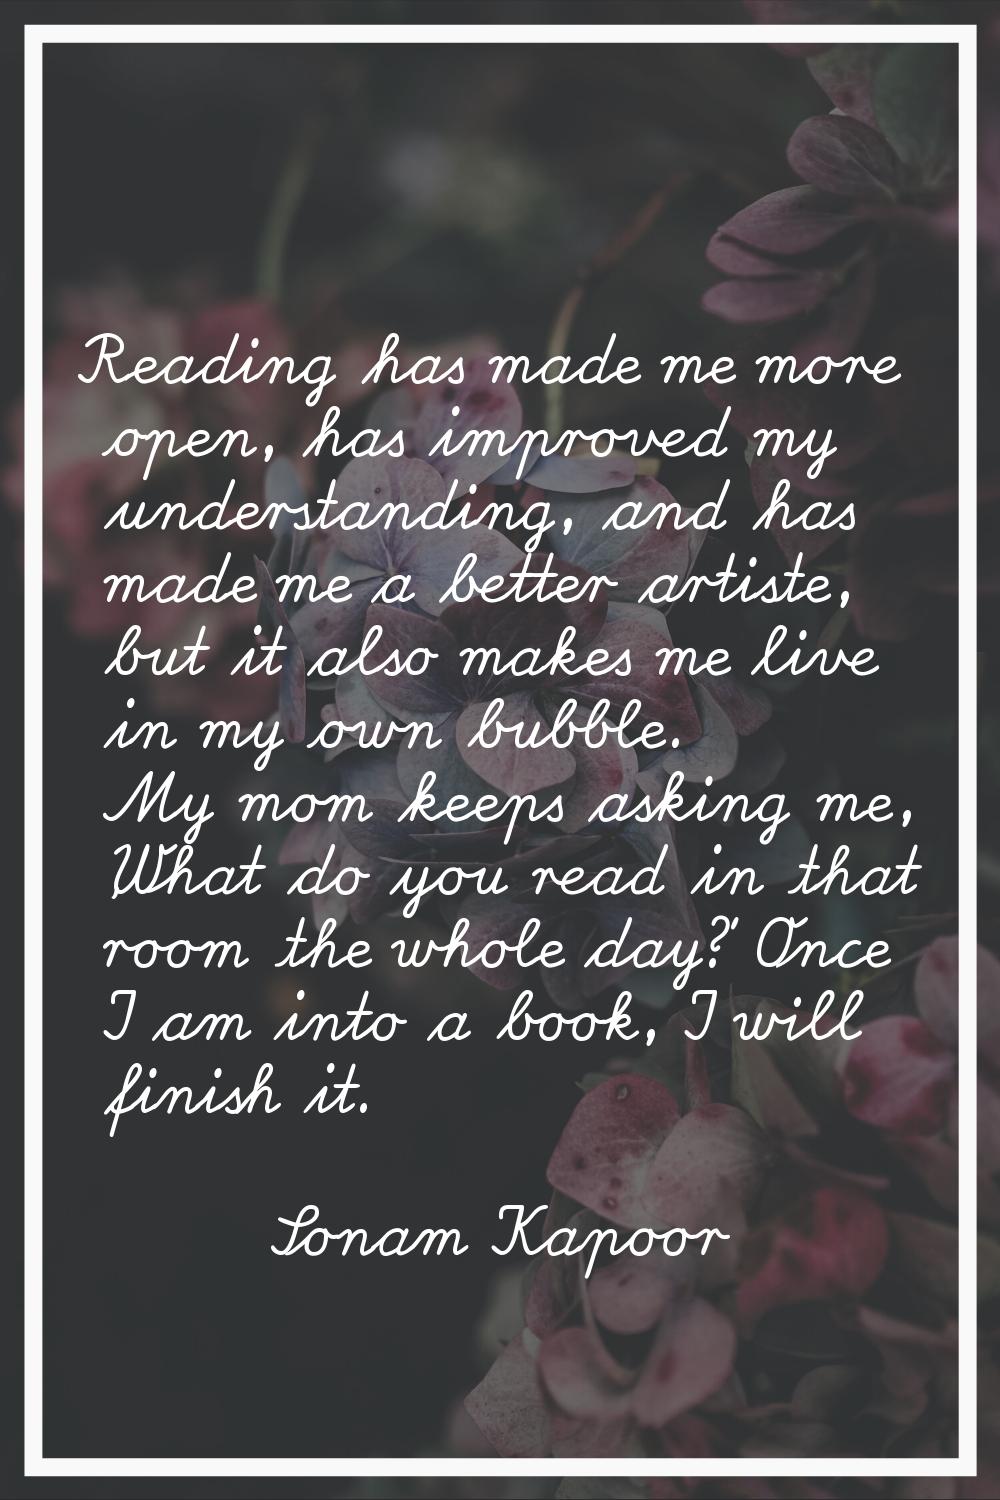 Reading has made me more open, has improved my understanding, and has made me a better artiste, but